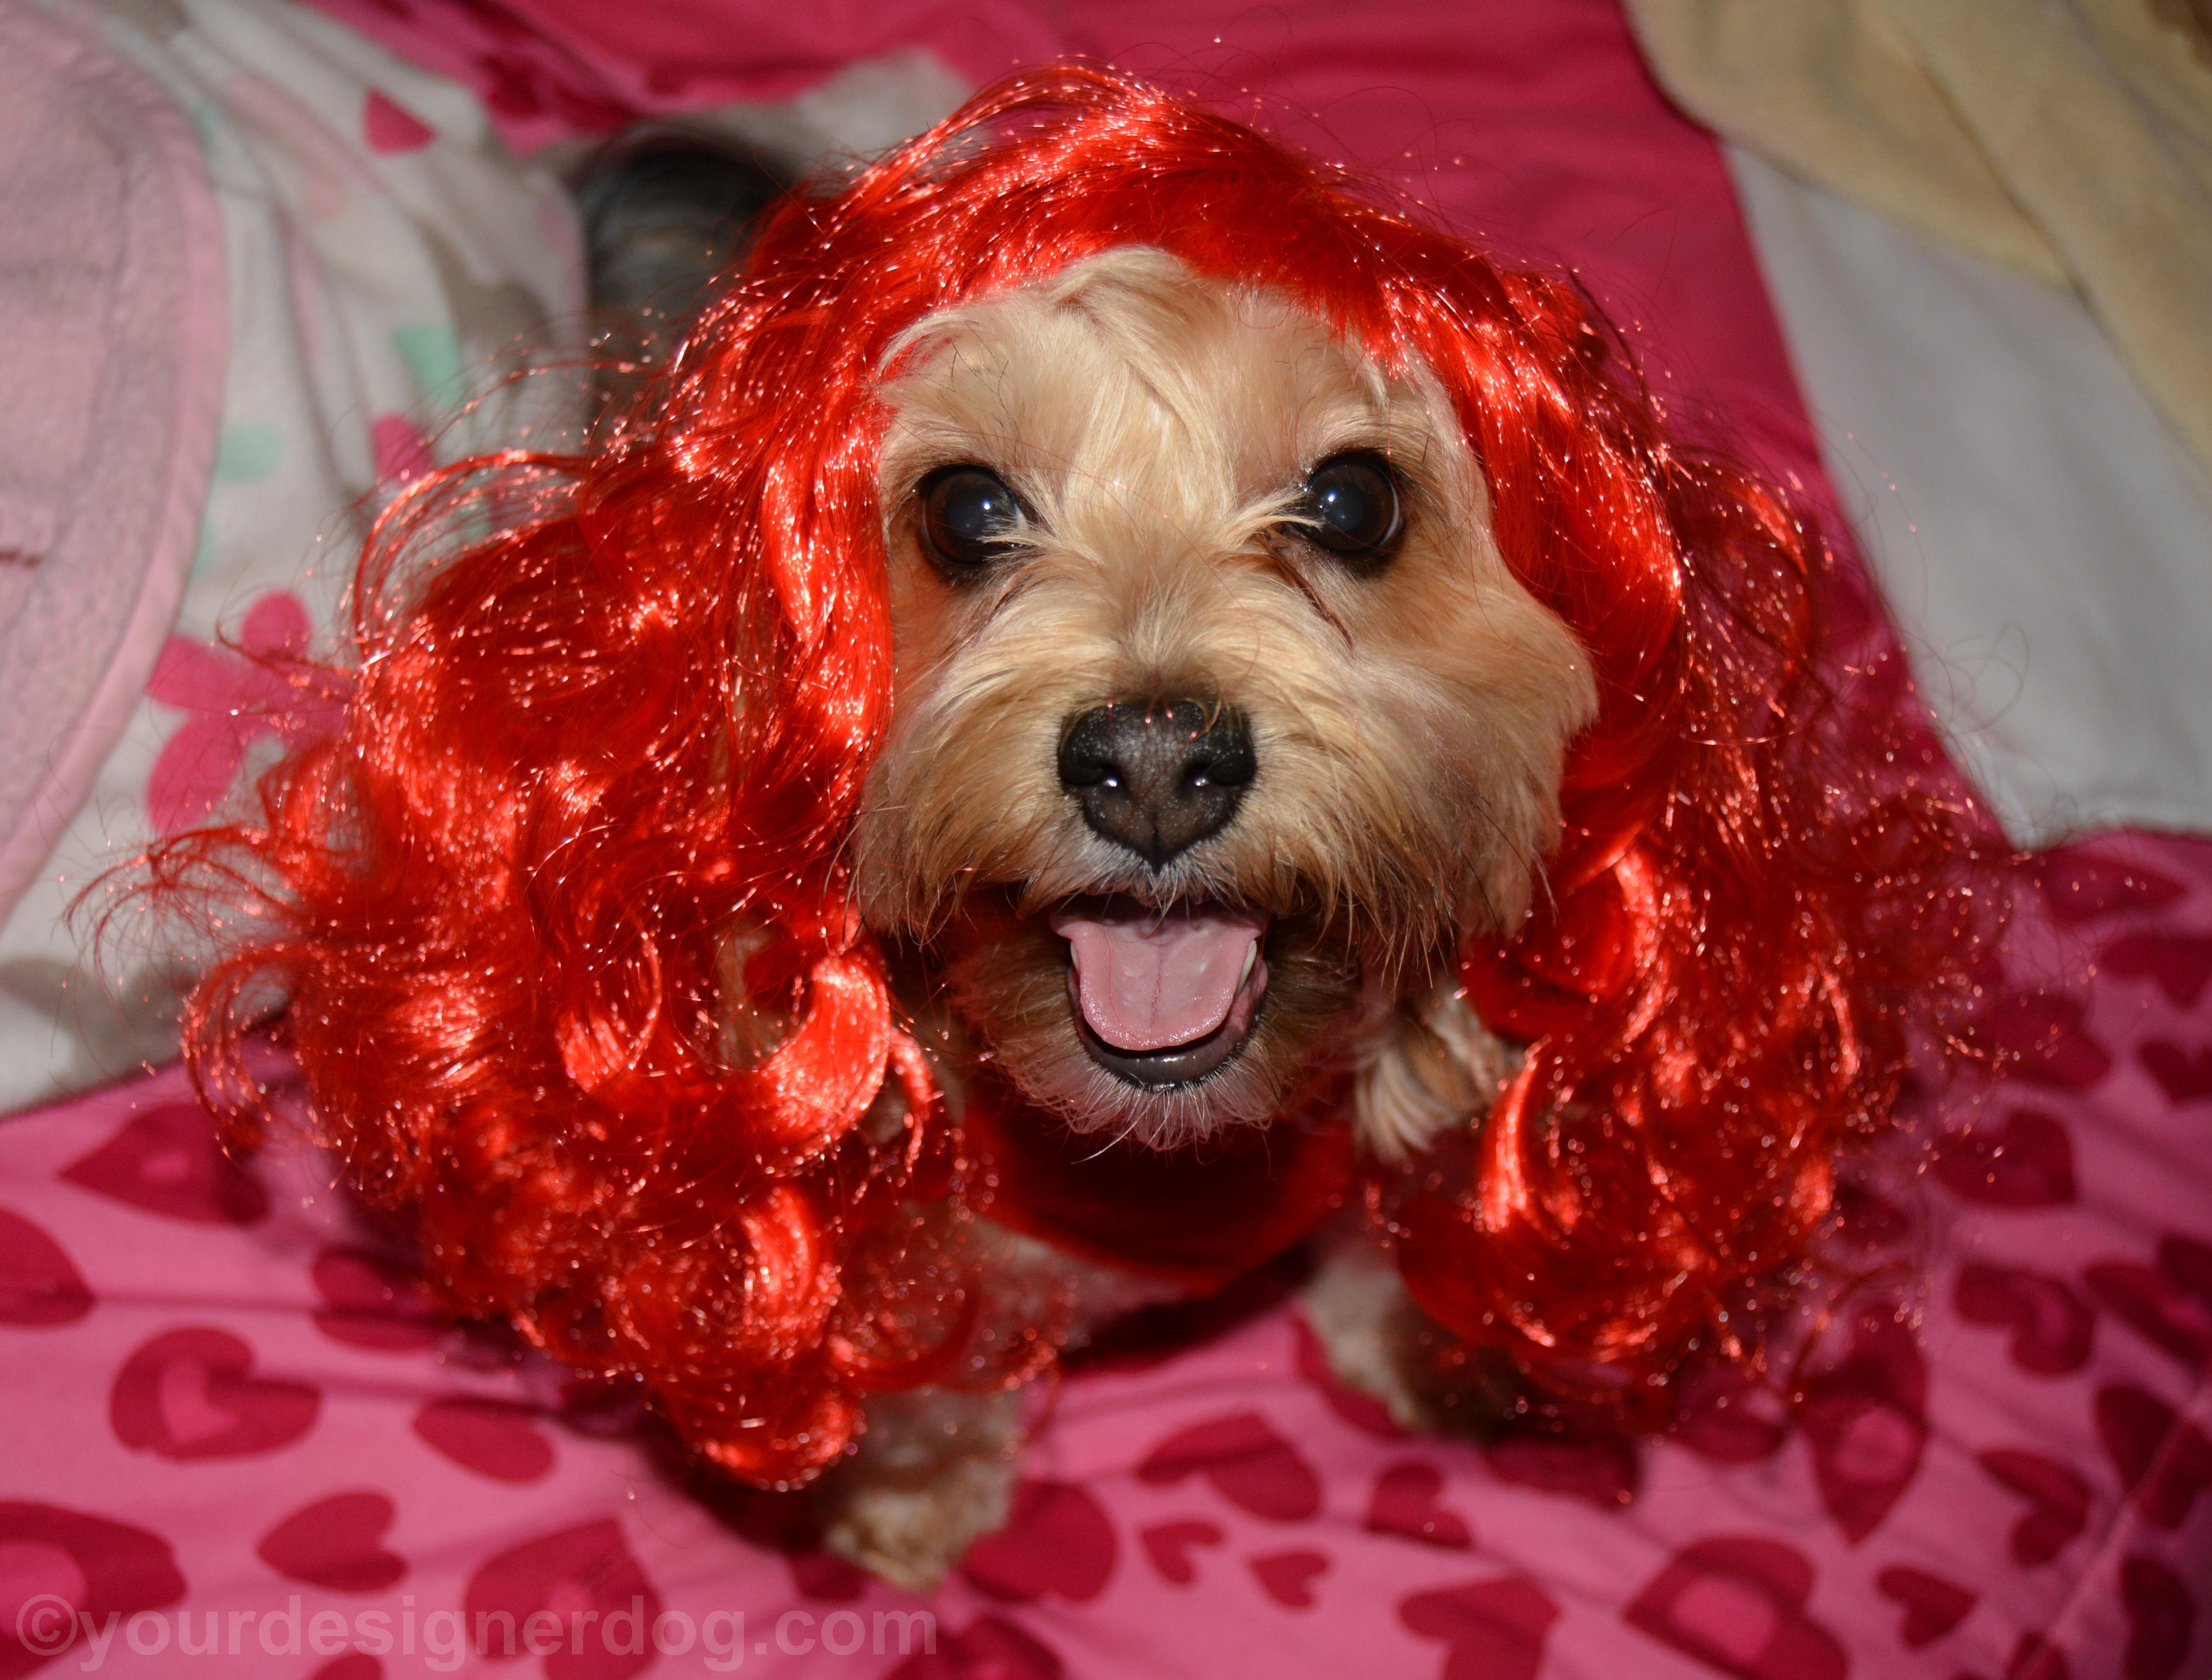 dogs, designer dogs, yorkipoo, yorkie poo, wig, red head, tongue out